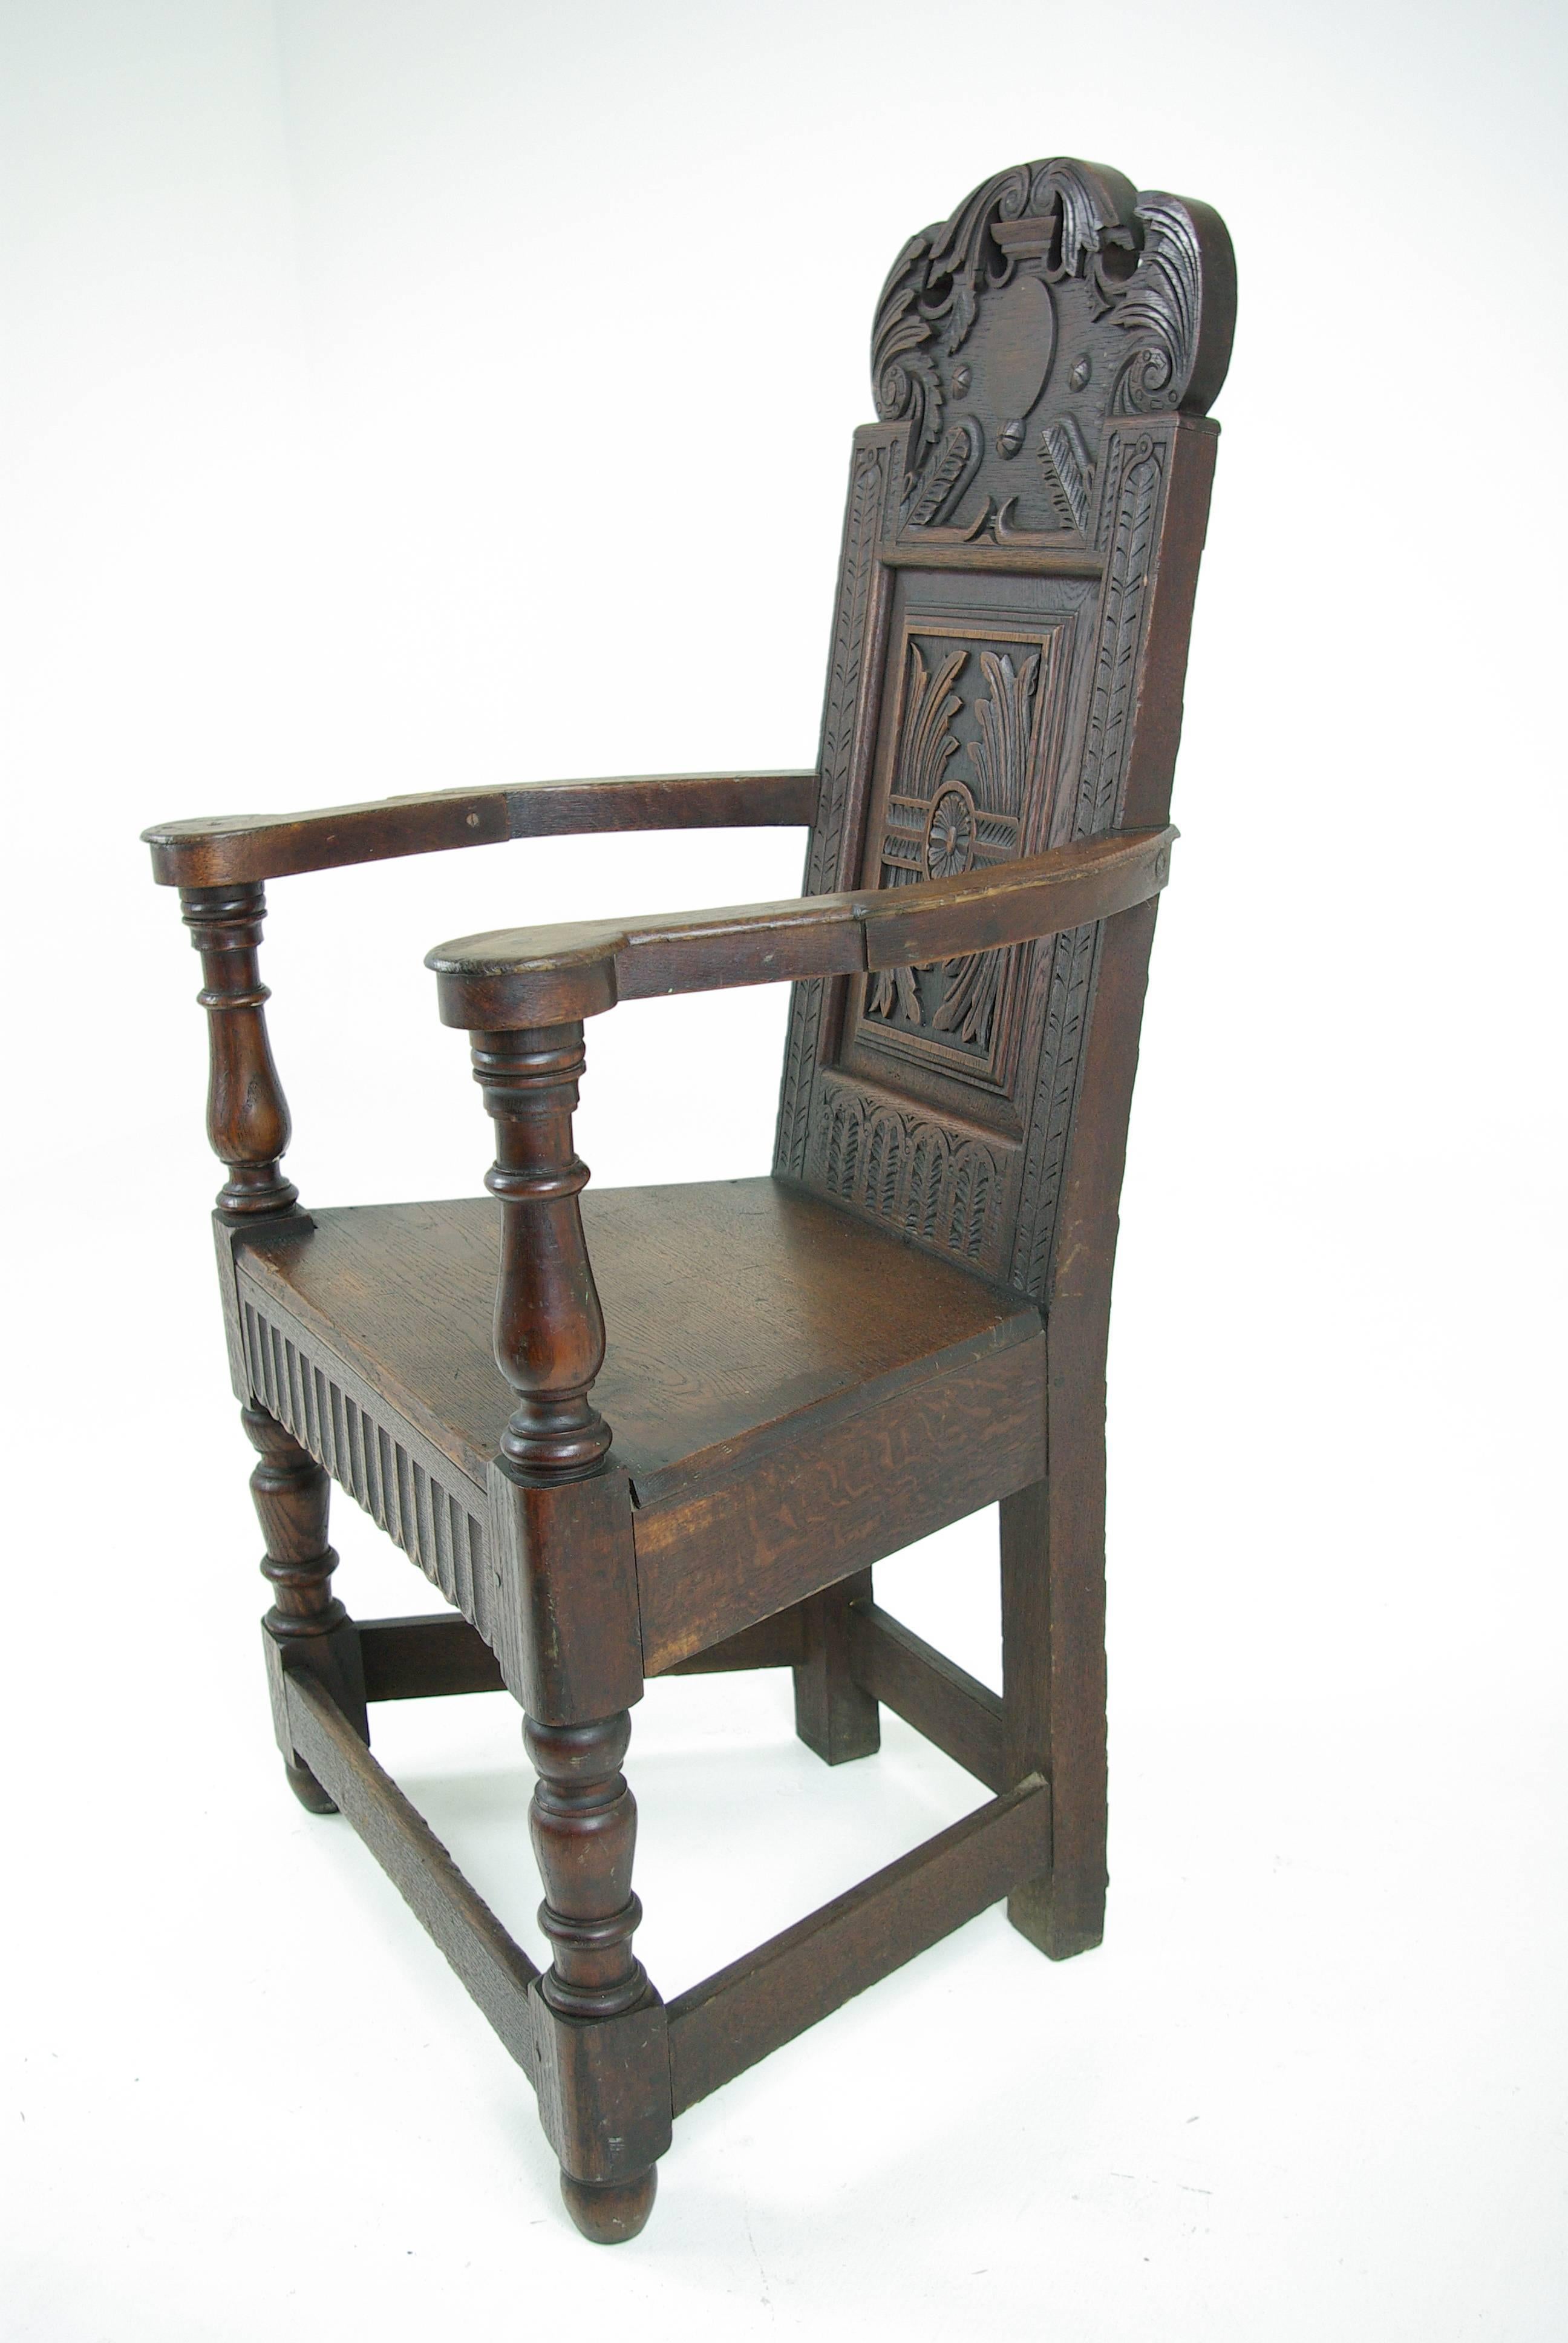 Carved Hall Chair, Oak, Solid Seat, Scotland 1840, B541 REDUCED!!

Scotland 
1840
Solid oak construction, original finish
Carved back
Curved shaped arms
Solid wooden seat
Heavy cross stretchers on base

Was $950  now just 

B541
Measures: 25